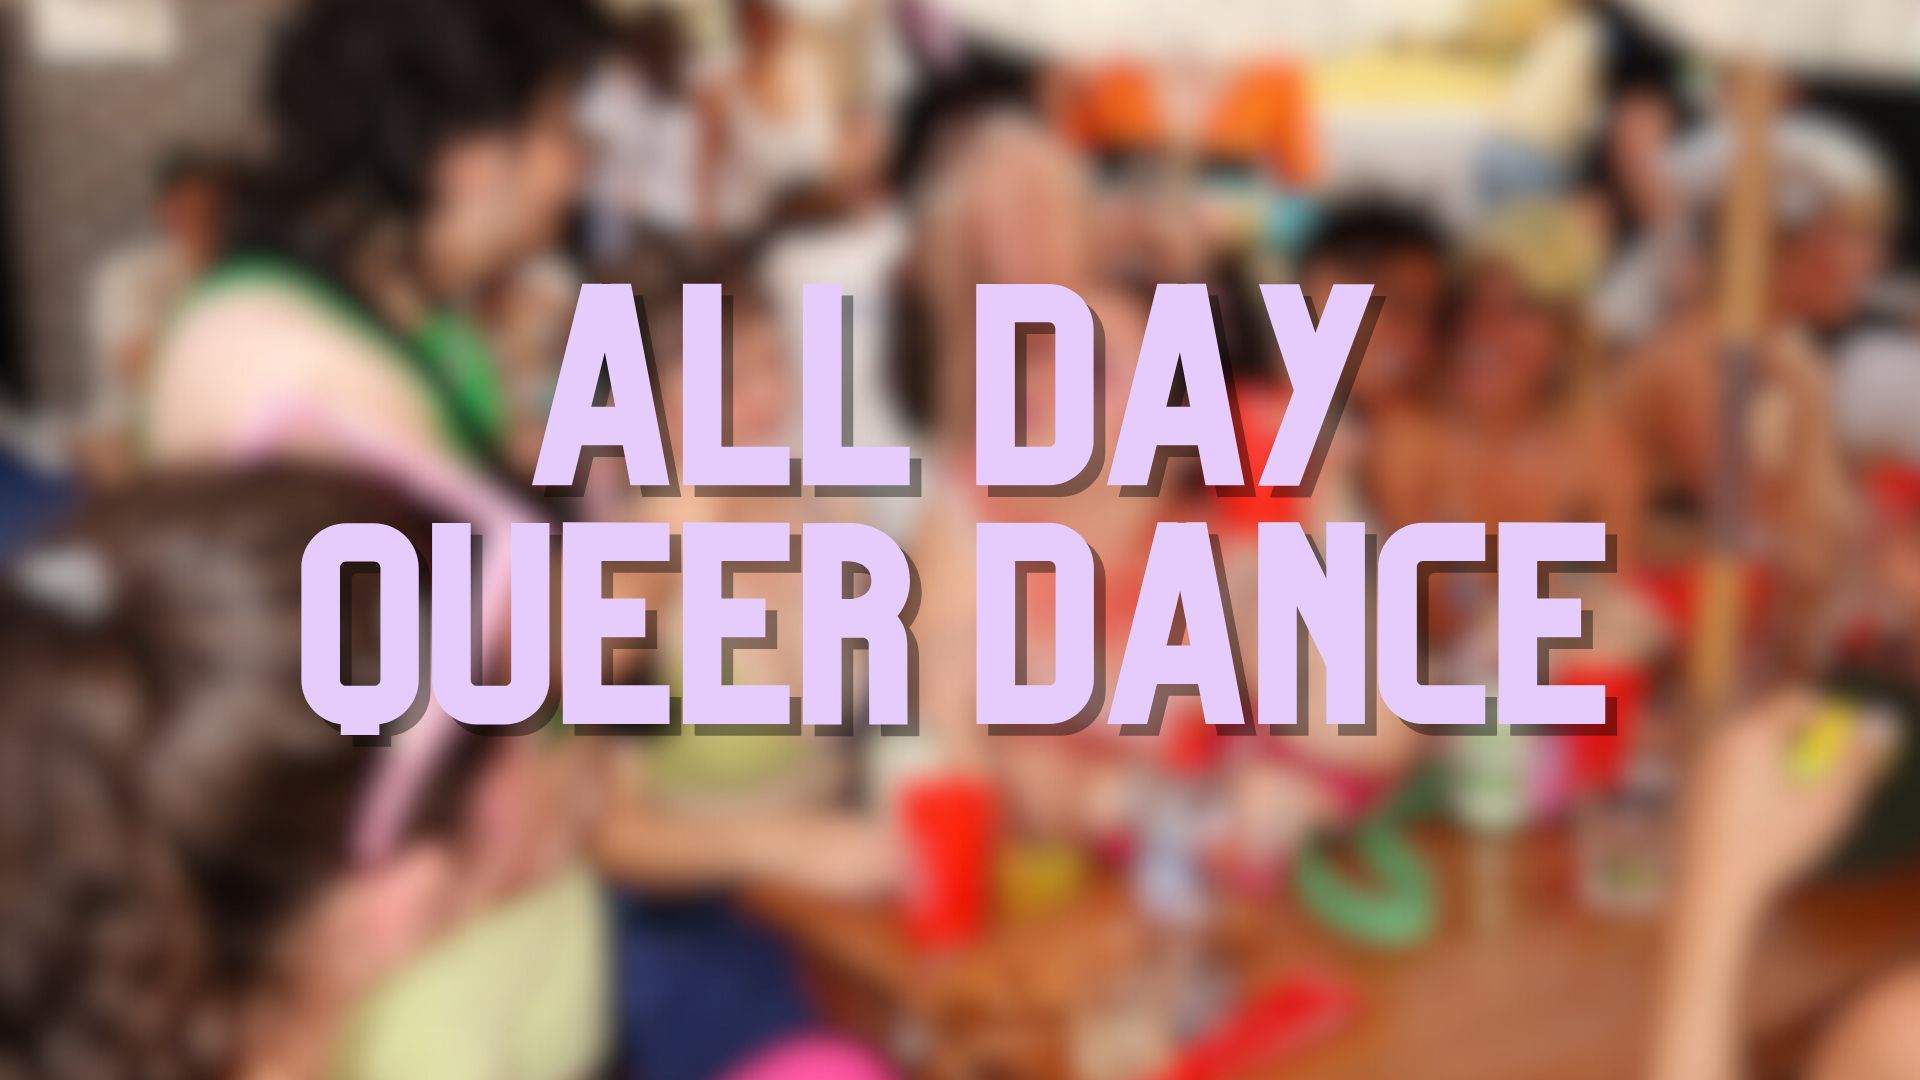 All Day Queer Dance - フライヤー表